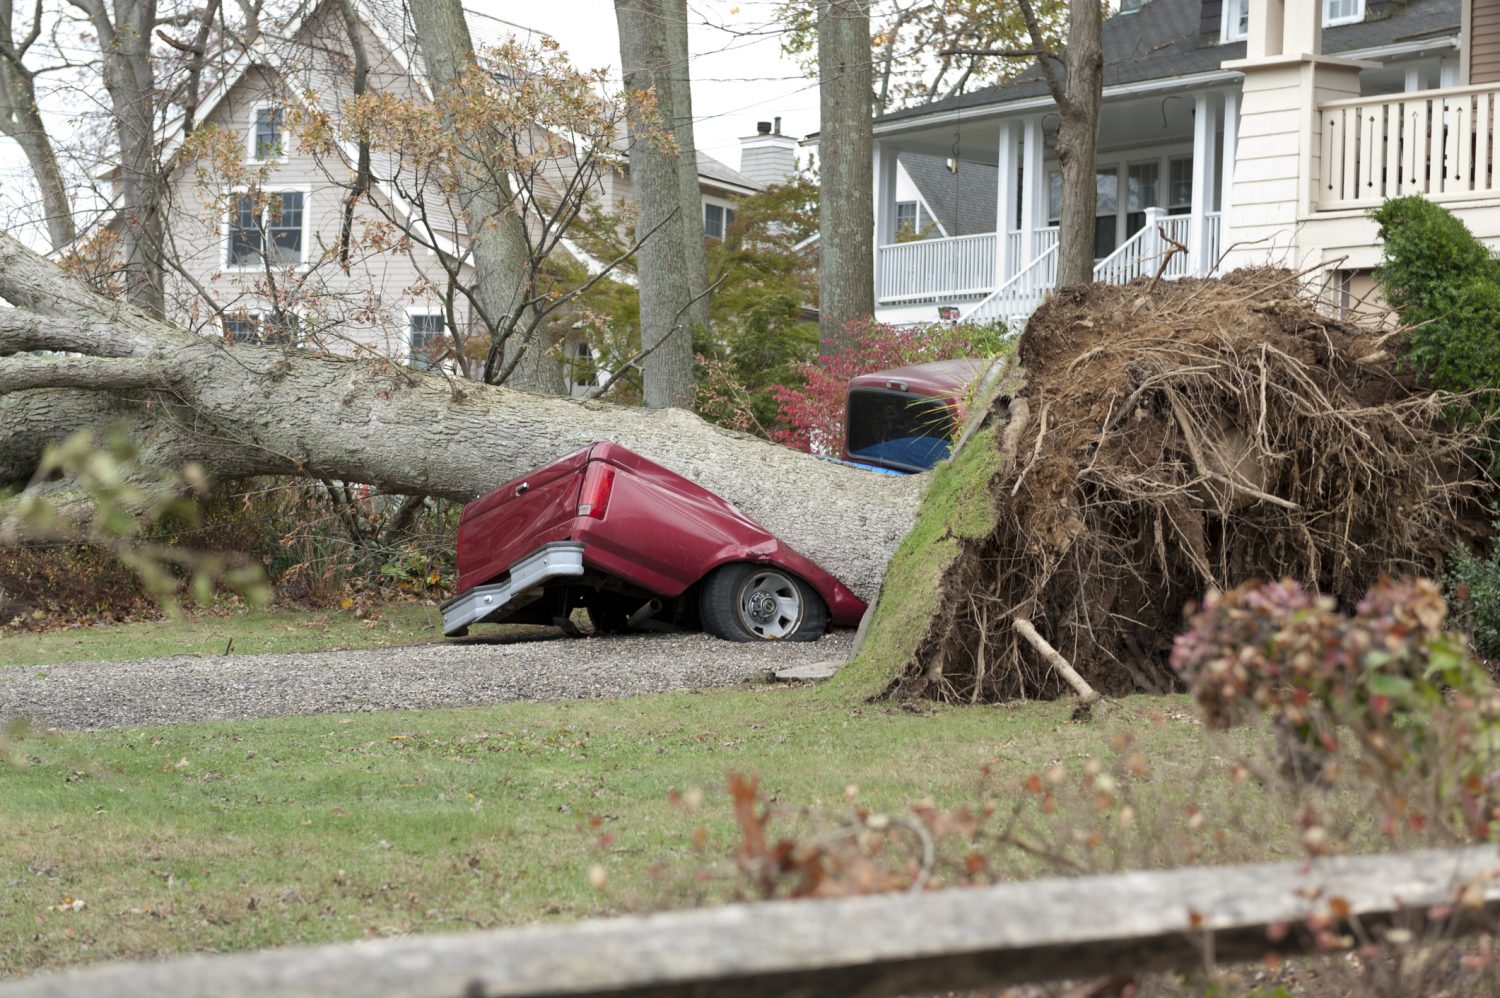 A fallen tree on a truck in a homeowner’s driveway during a hurricane.